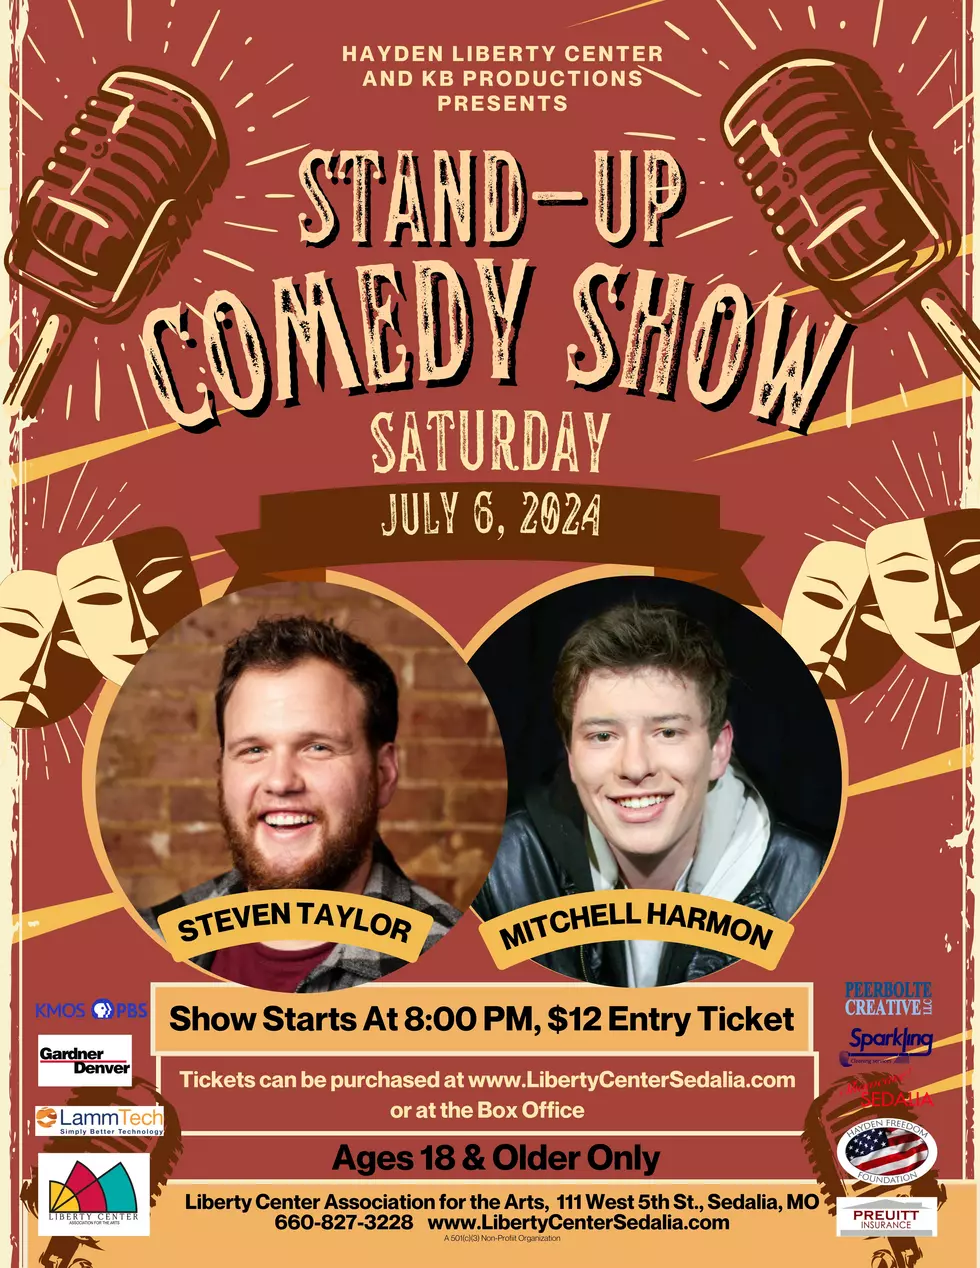 Comedy Show Slated for July 6 at Hayden Liberty Center